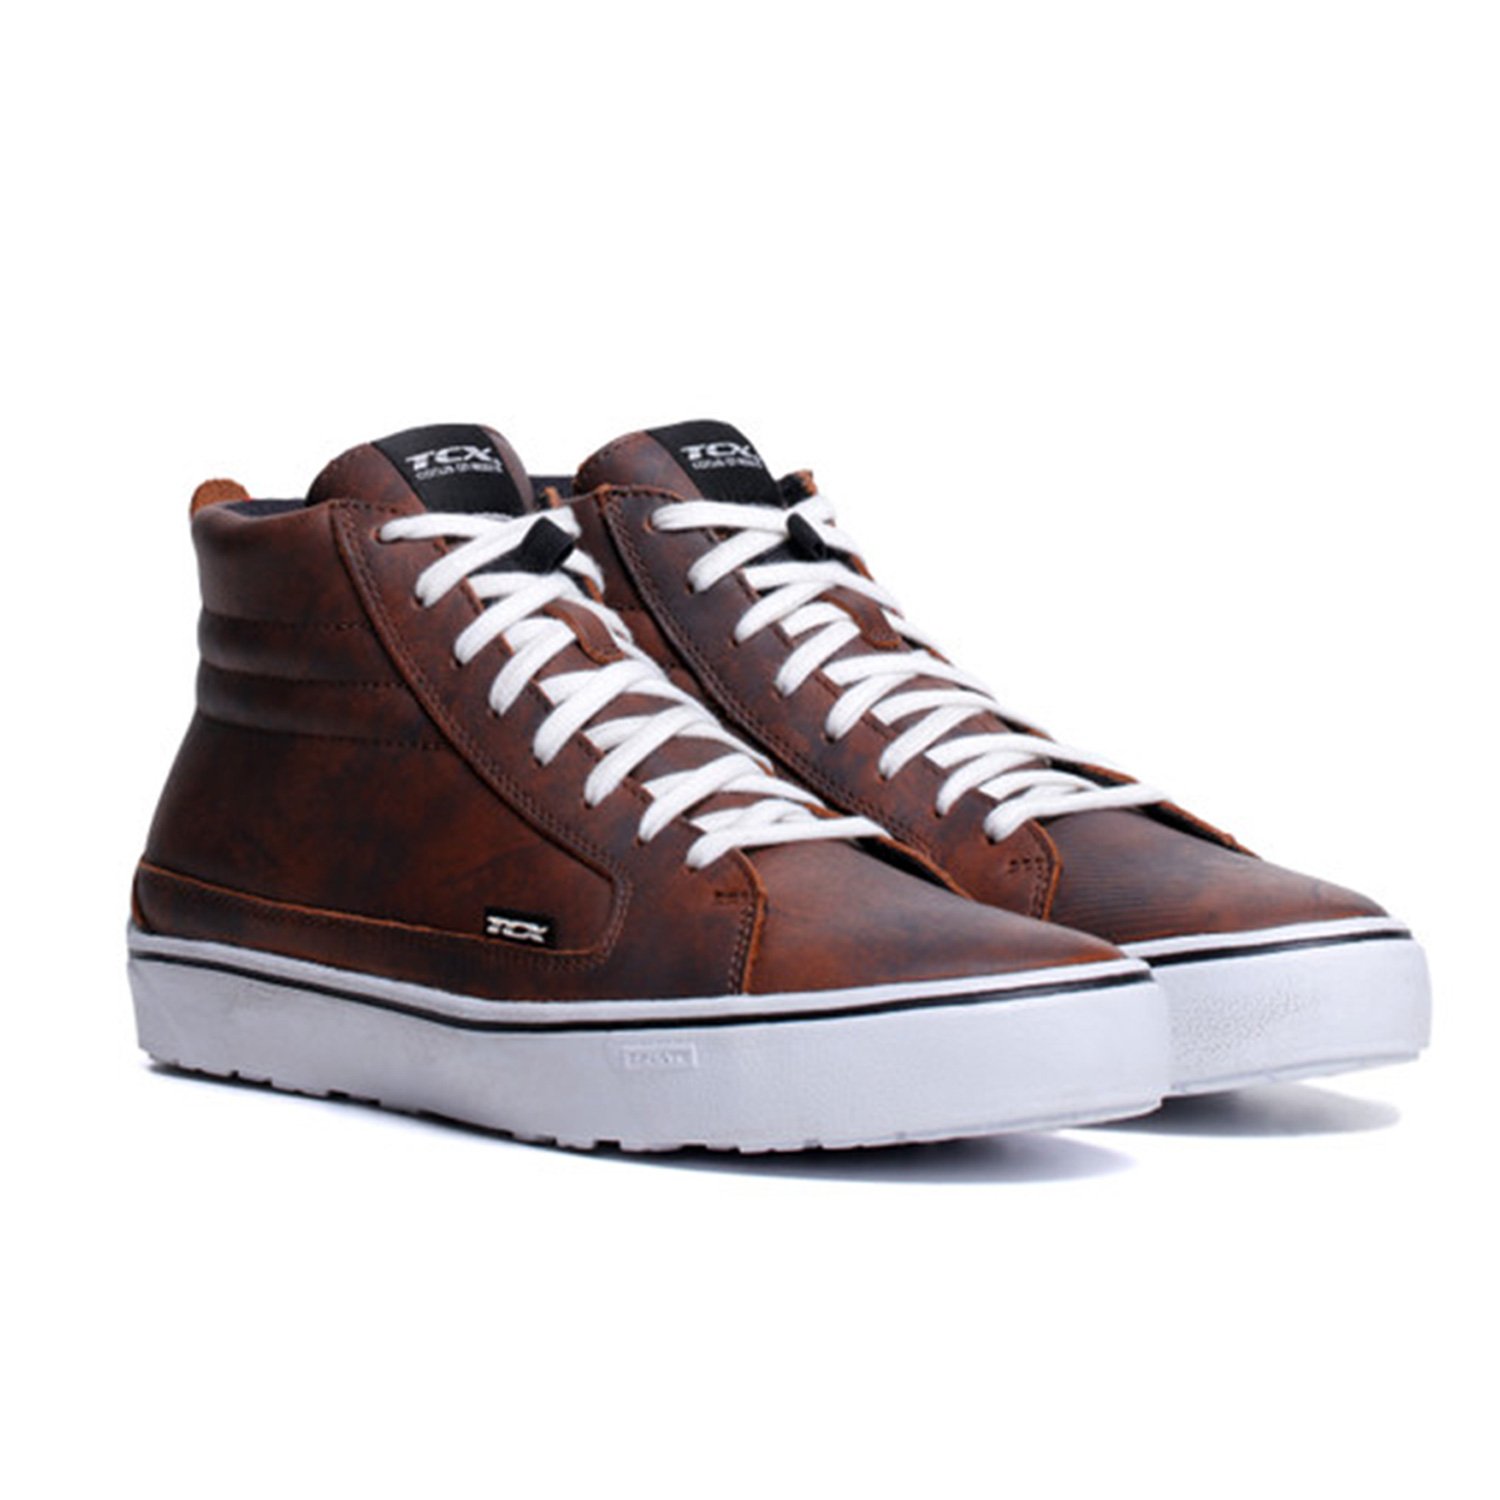 Image of EU TCX Street 3 WP Marron Blanc Chaussures Taille 41